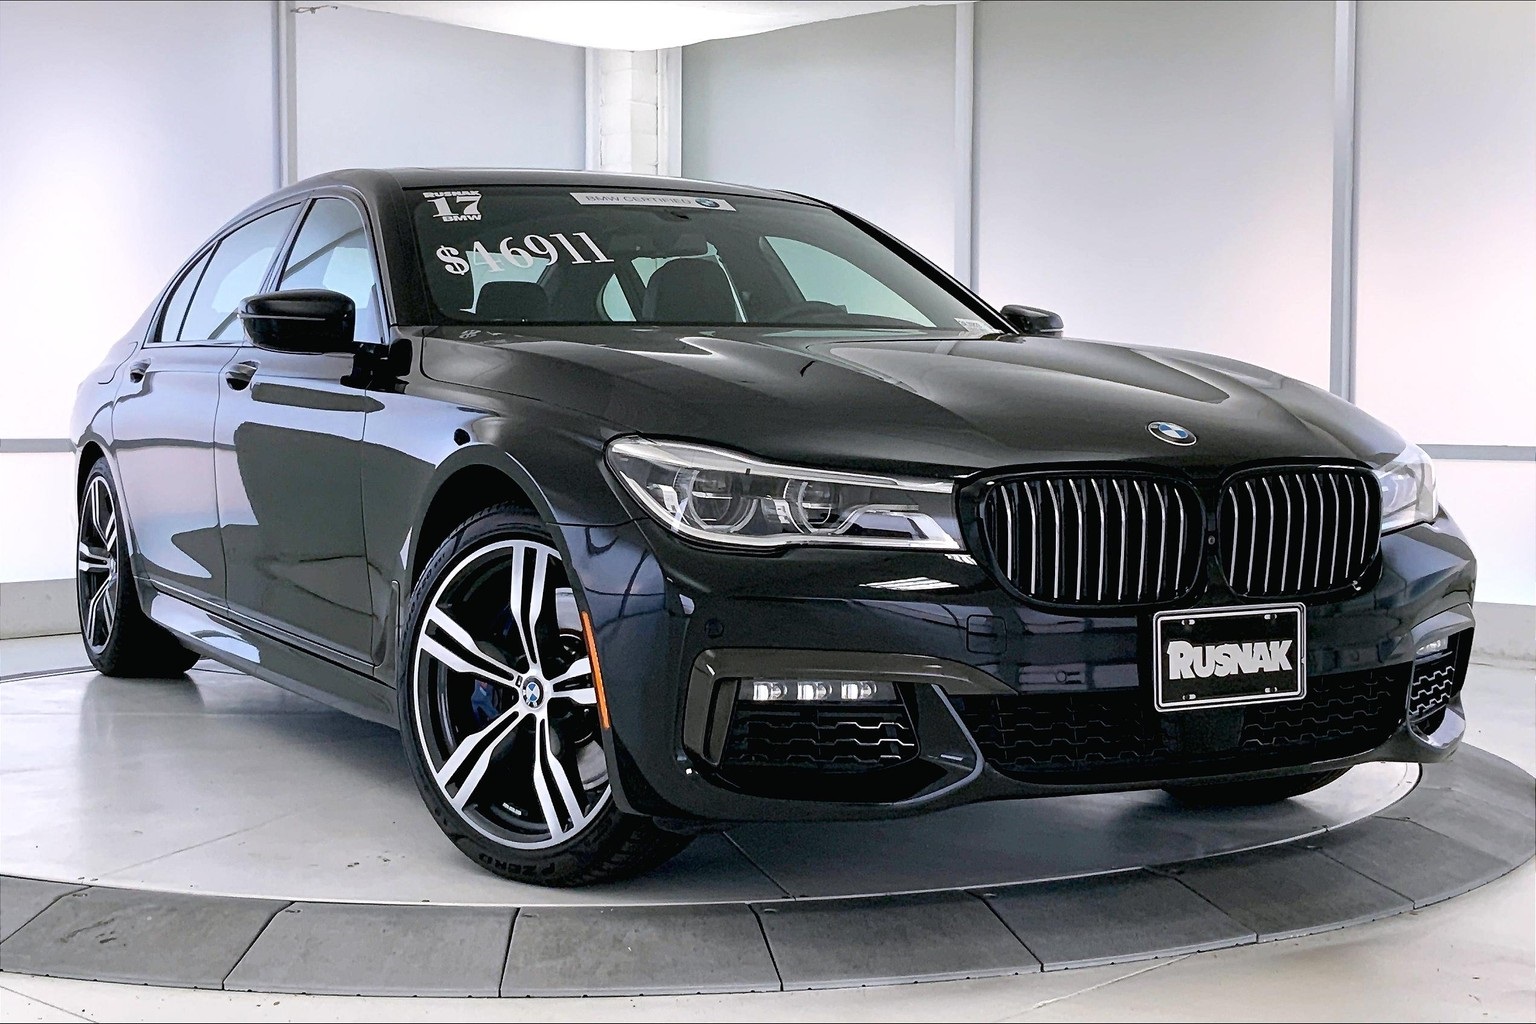 Certified Pre-Owned 2017 BMW 7 Series 750i xDrive 4D Sedan in Thousand